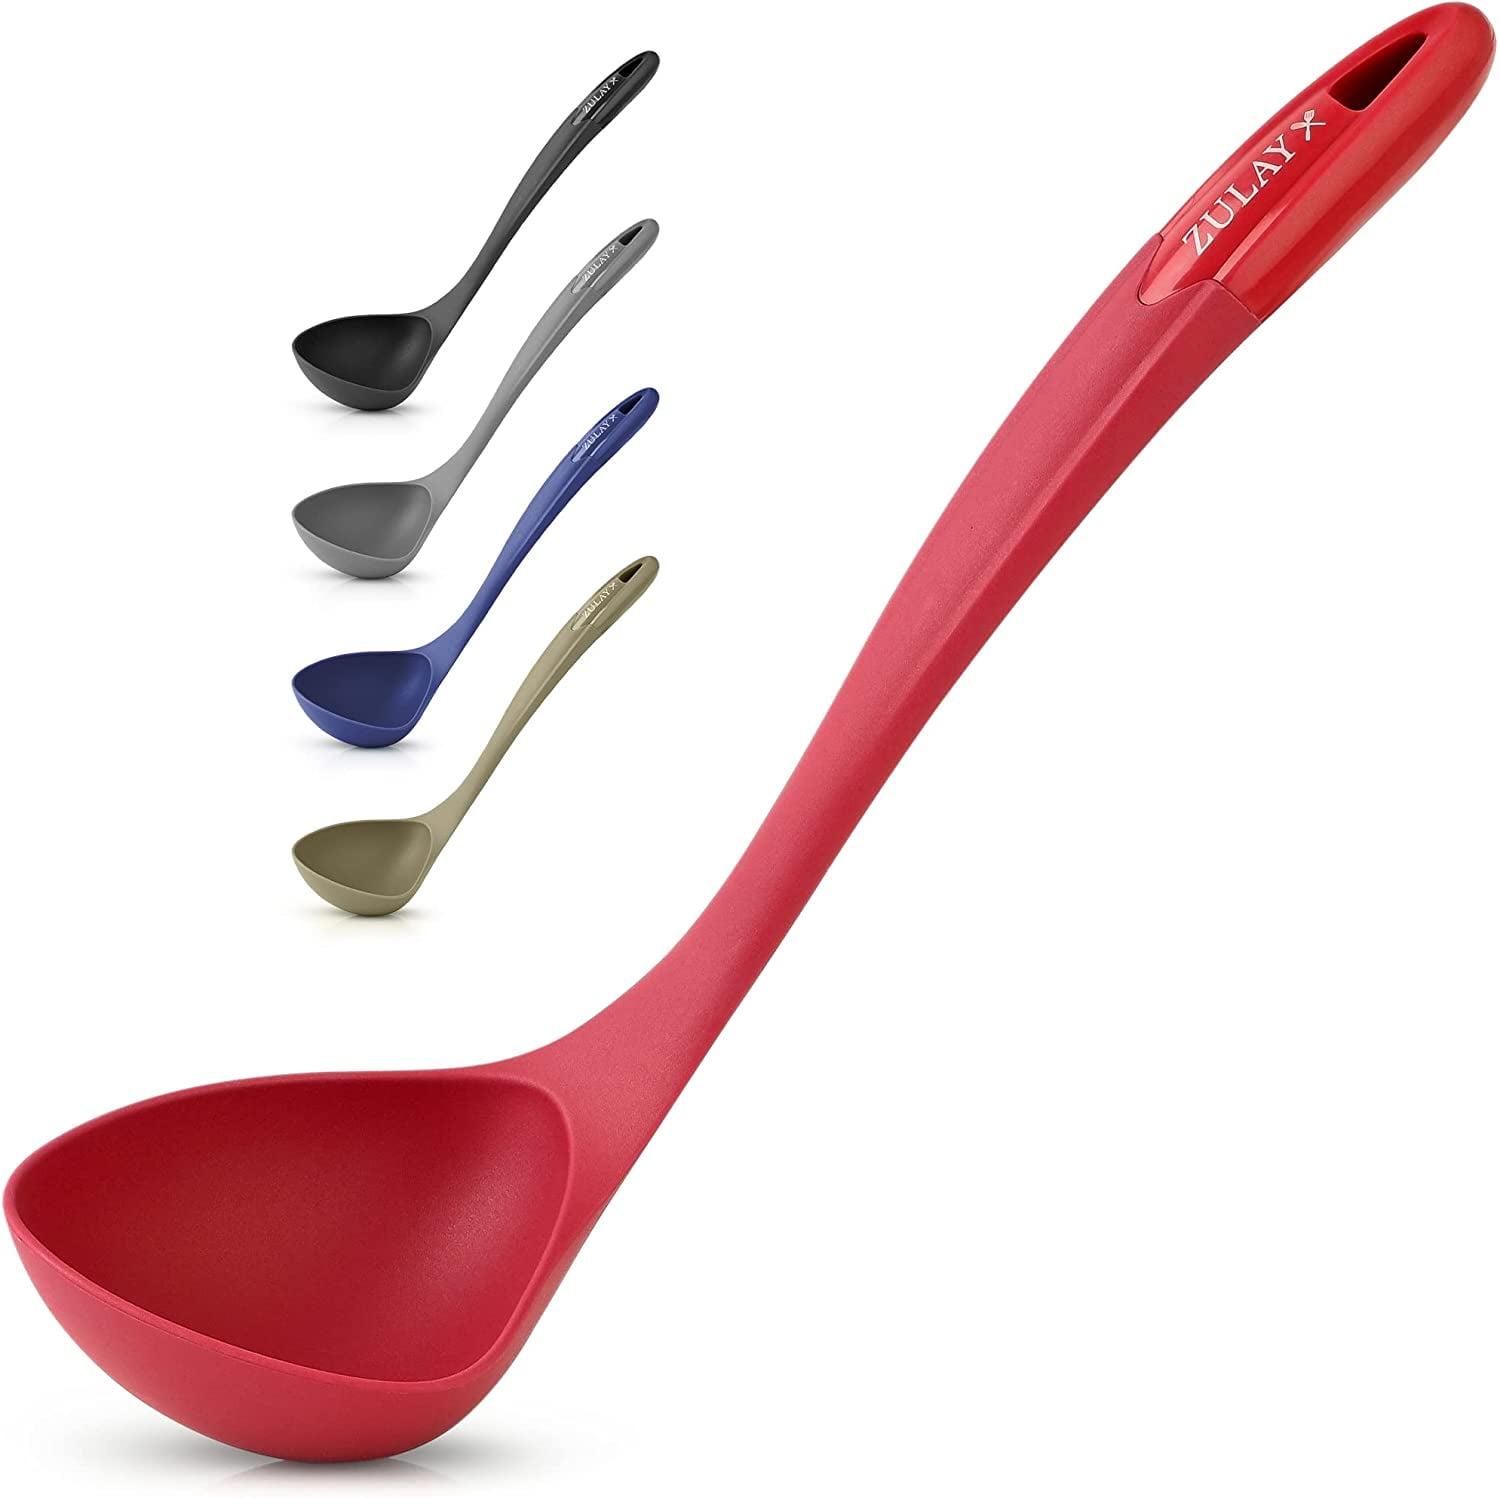 13 inch Silicone Soup Ladle for Kitchen, Cooking | U-Taste Red